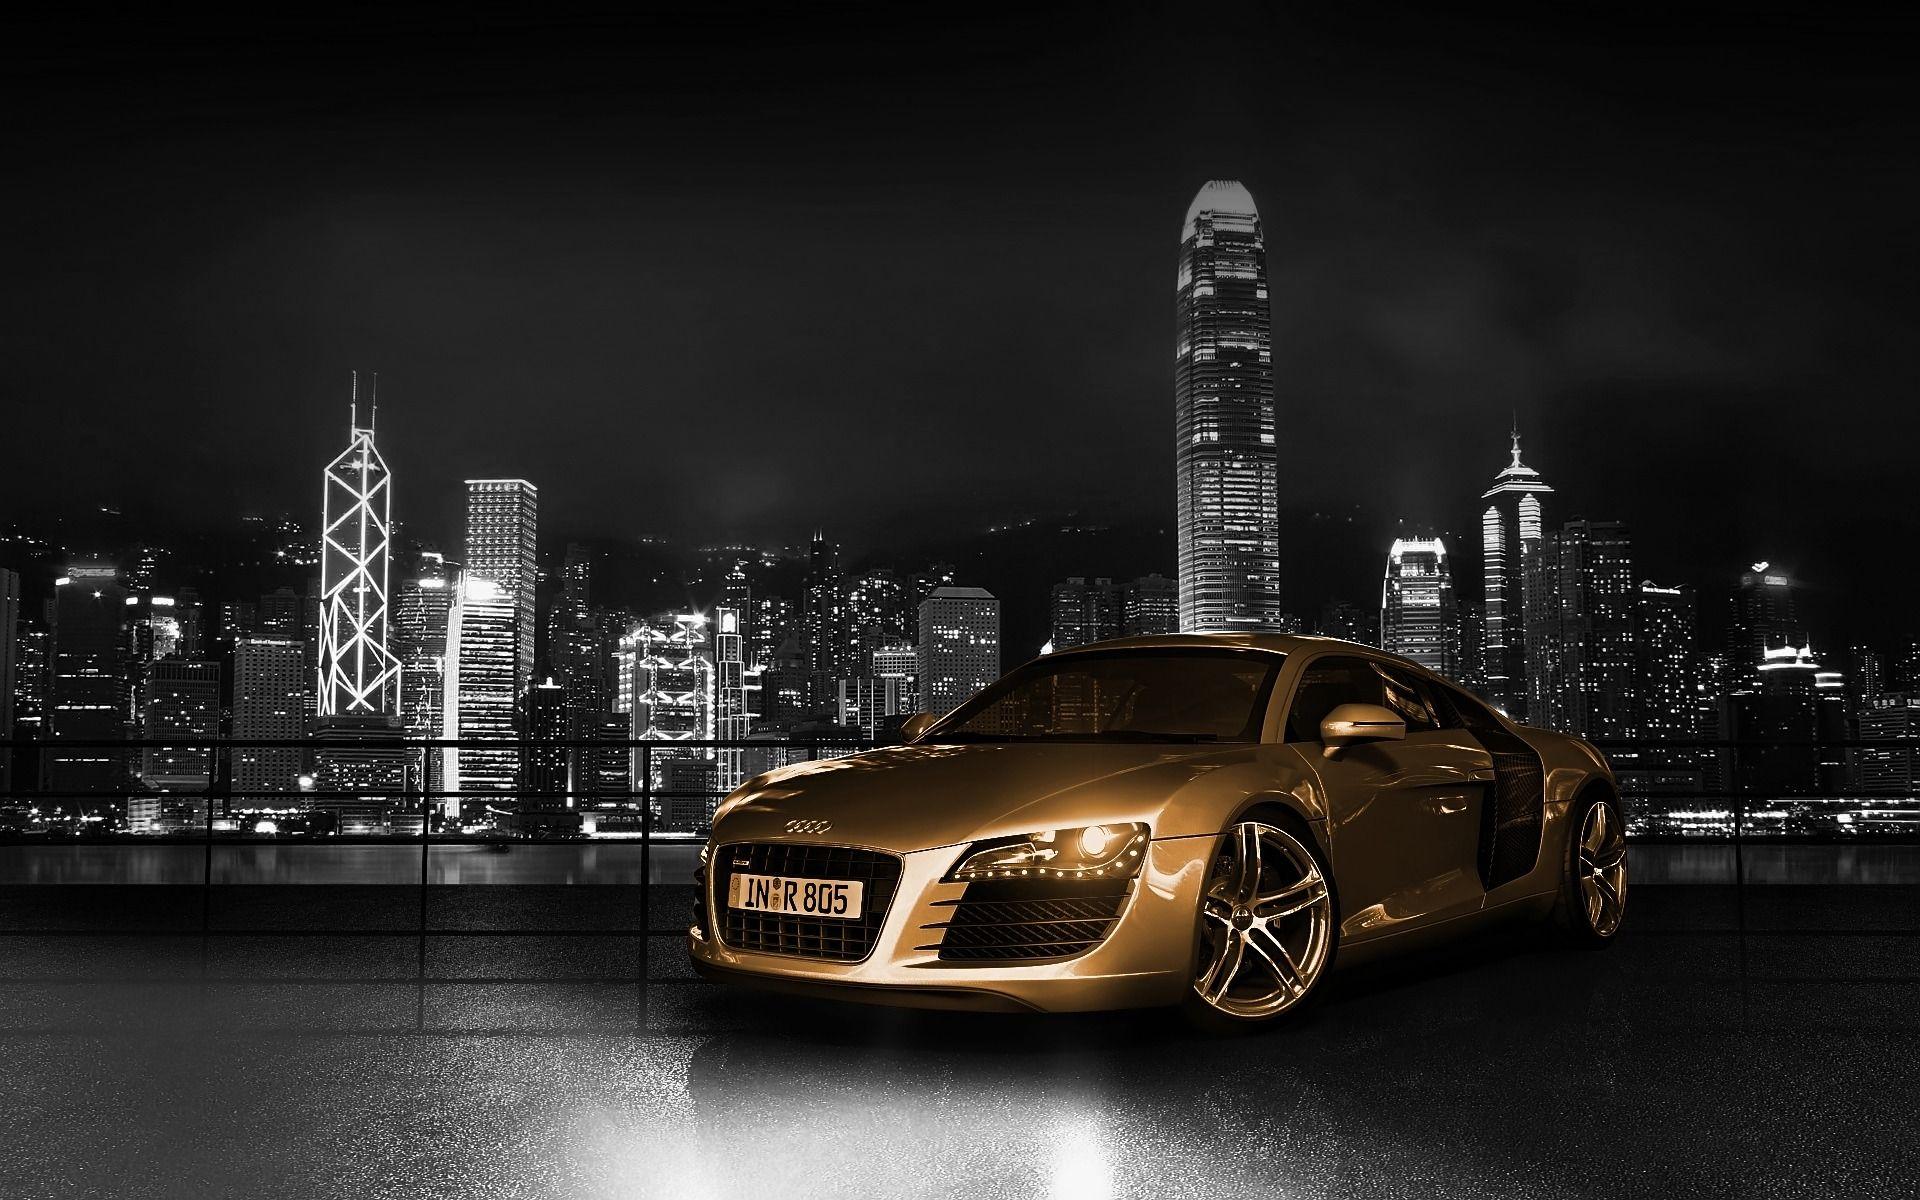 Audi car wallpaper wallpaper for free download about 274